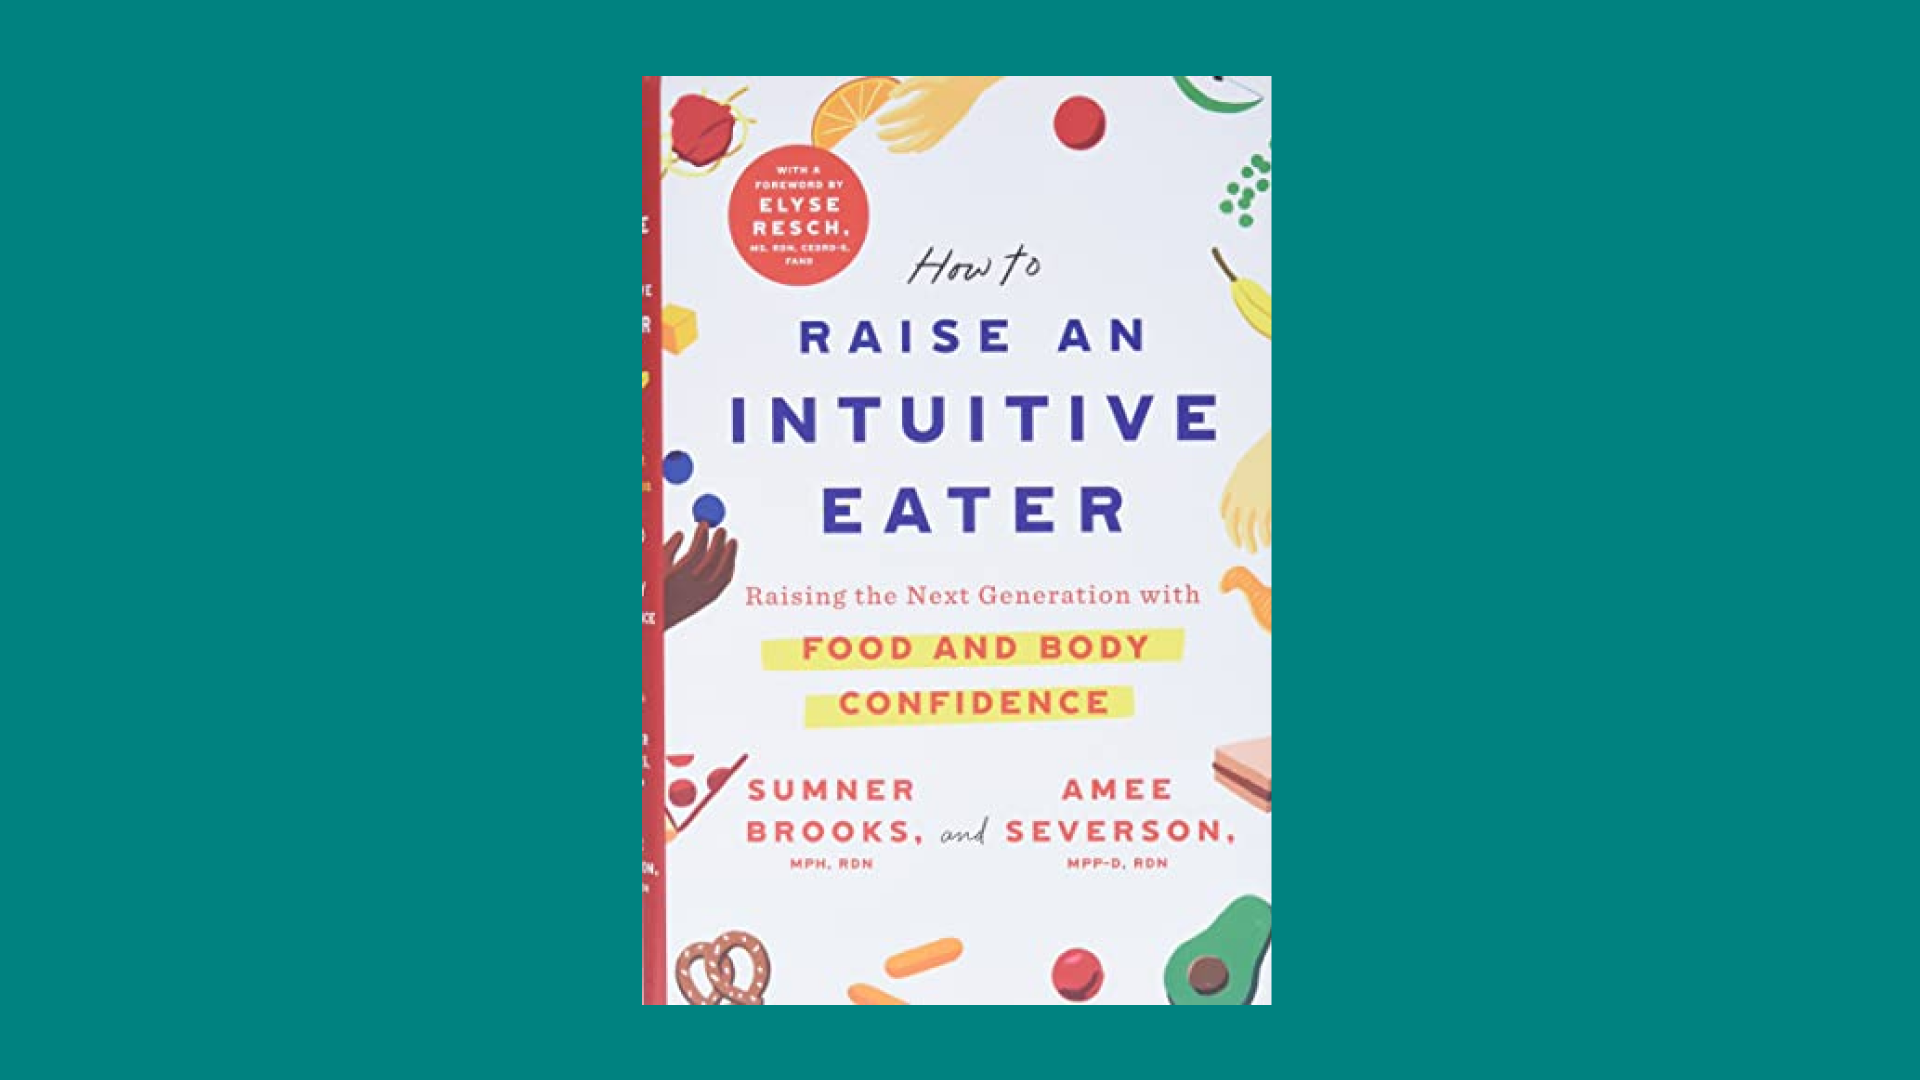 “How to Raise an Intuitive Eater: Raising the Next Generation With Food and Body Confidence” by Sumner Brooks and Amee Severson